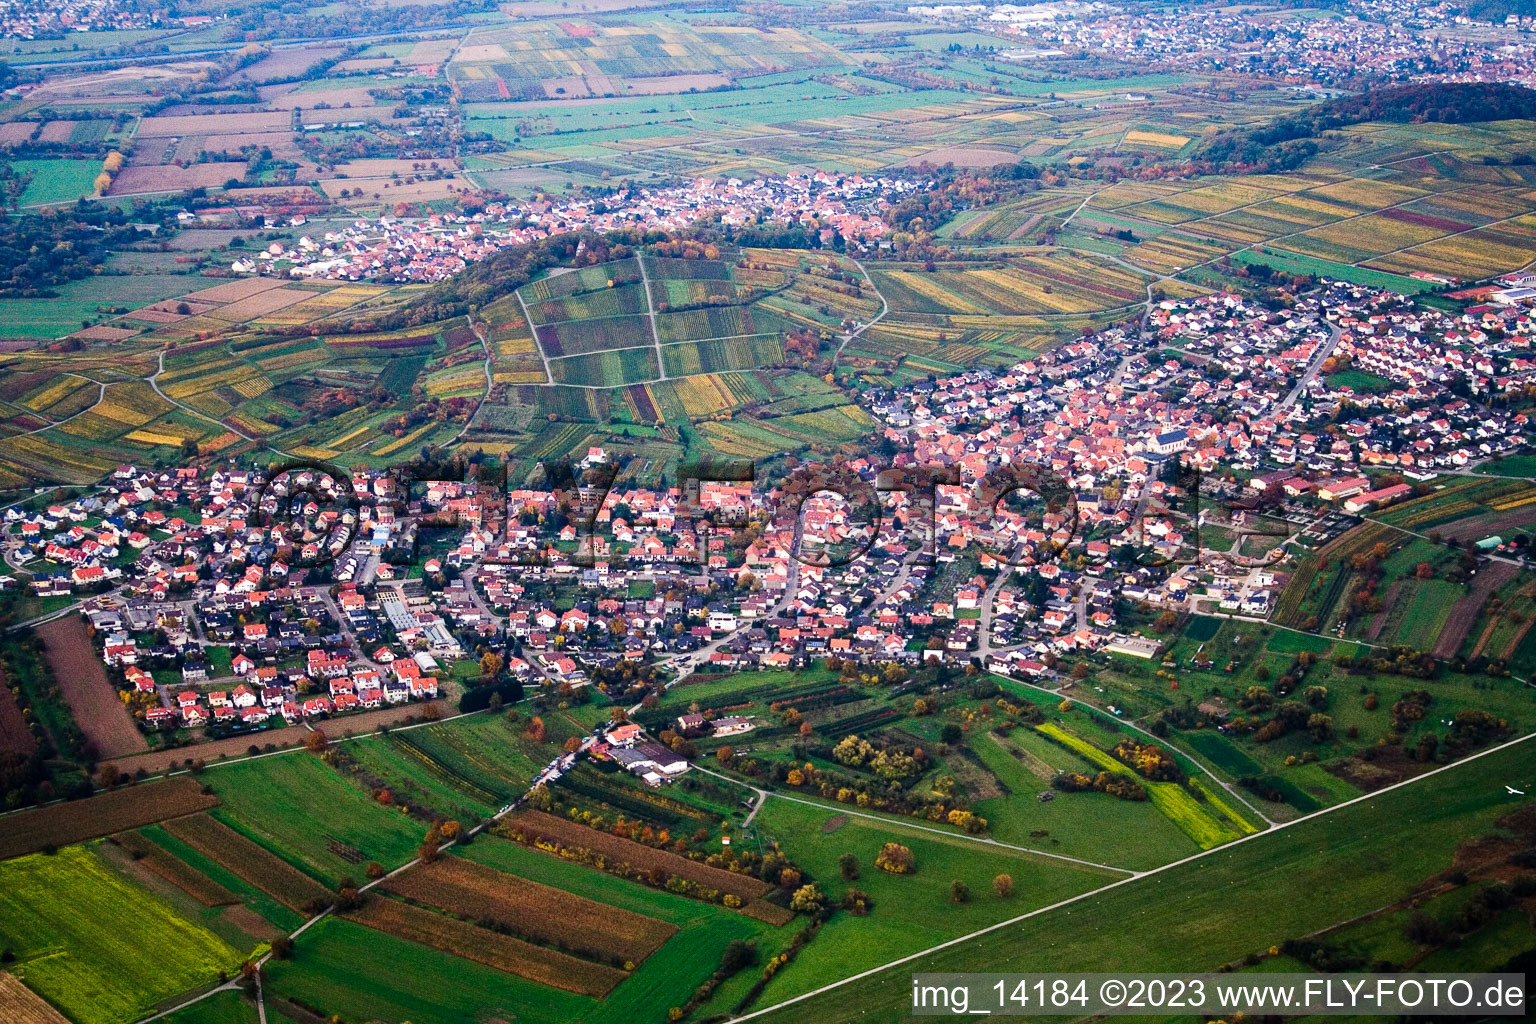 Drone image of Malsch in the state Baden-Wuerttemberg, Germany